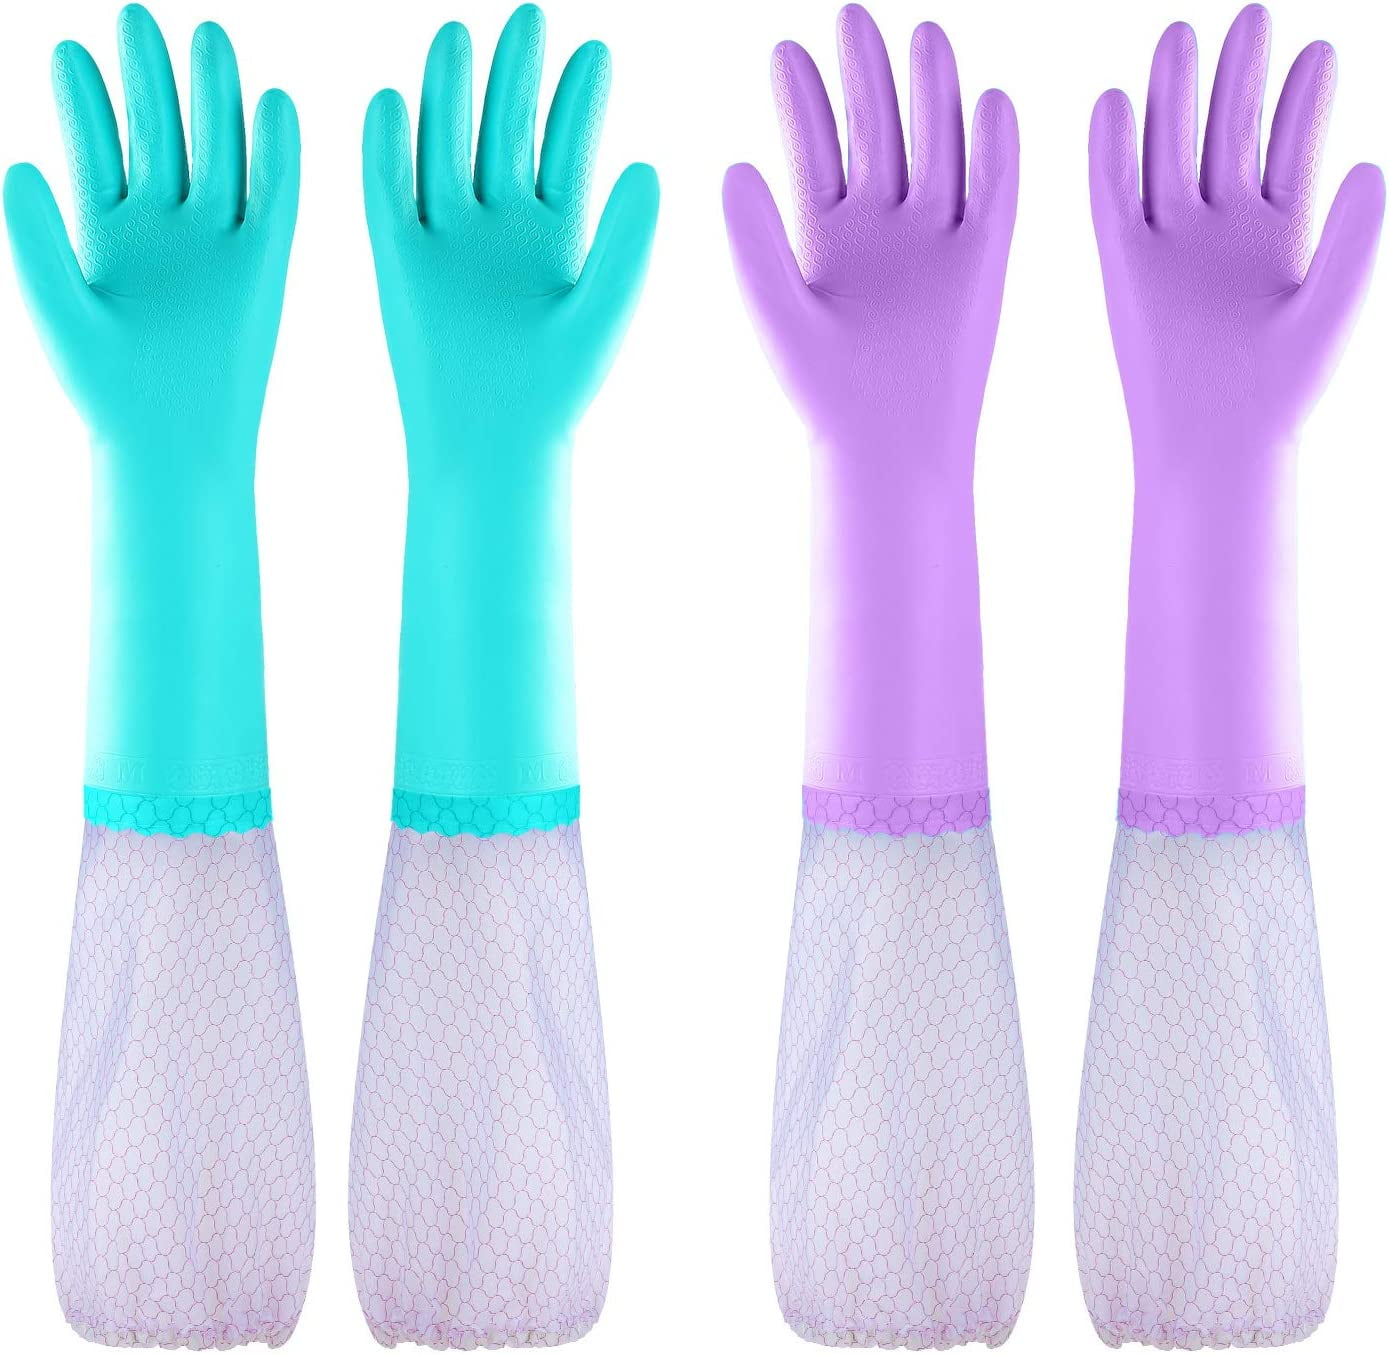 Dishwashing Gloves Kitchen Glove Wash up Gloves 2 Pairs Elgood Household Cleaning Gloves with Latex Free Blue+Purple, M 